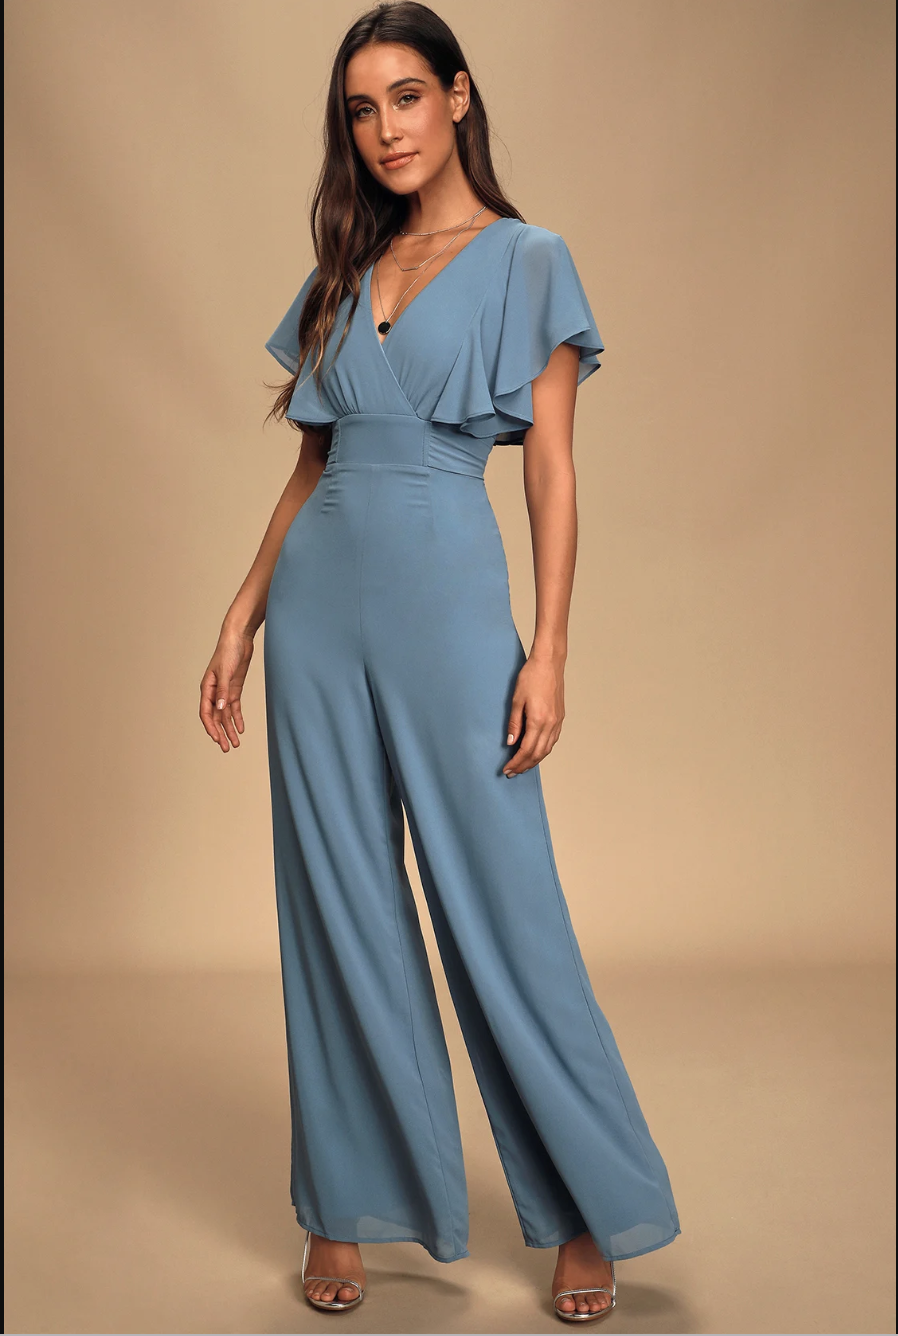 petite dressy jumpsuits for wedding guest